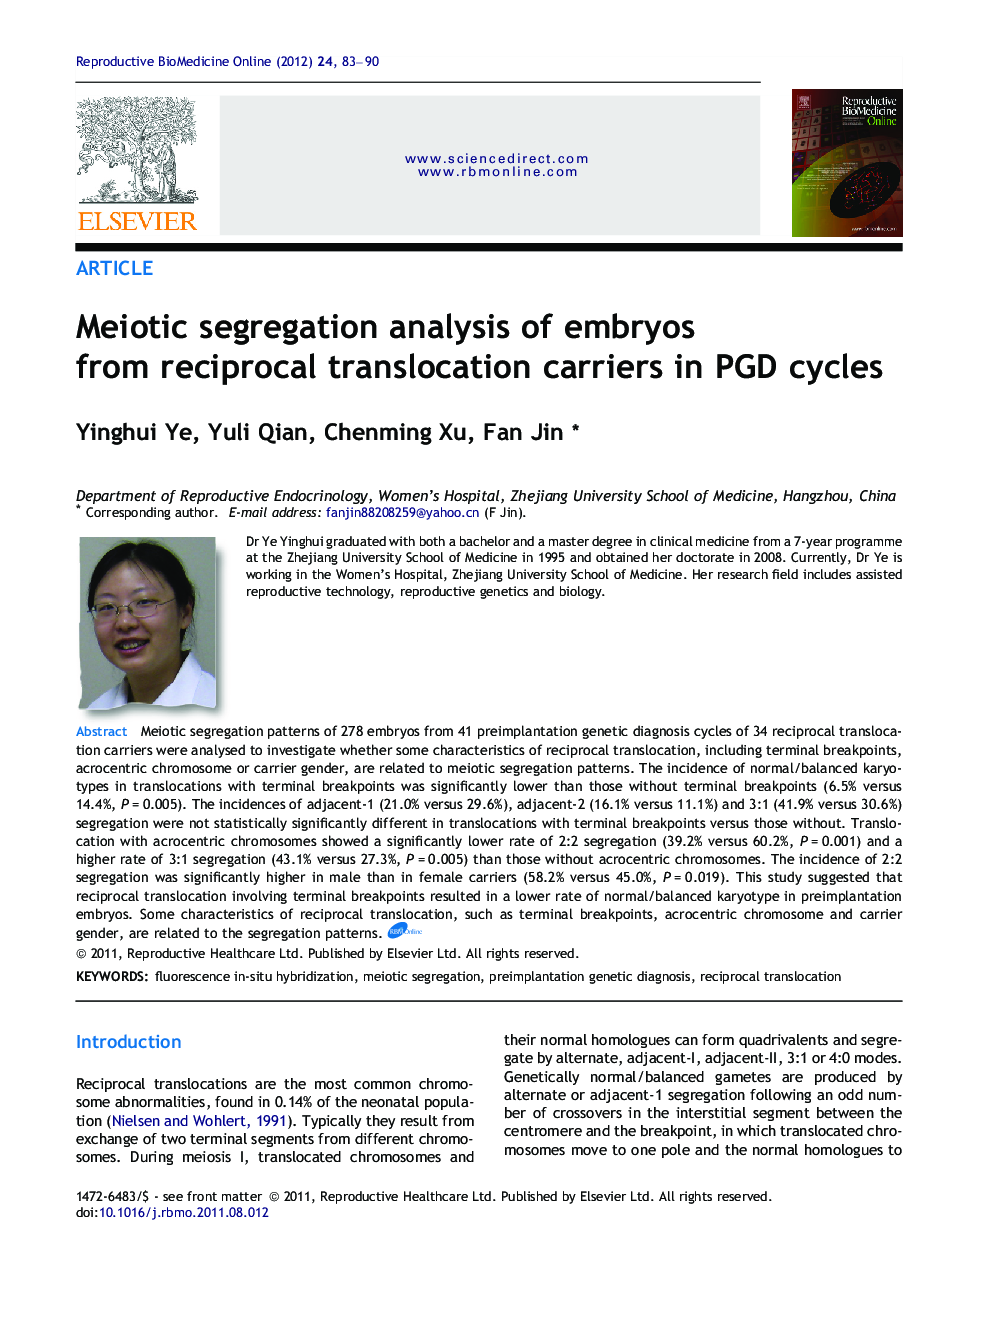 Meiotic segregation analysis of embryos from reciprocal translocation carriers in PGD cycles 